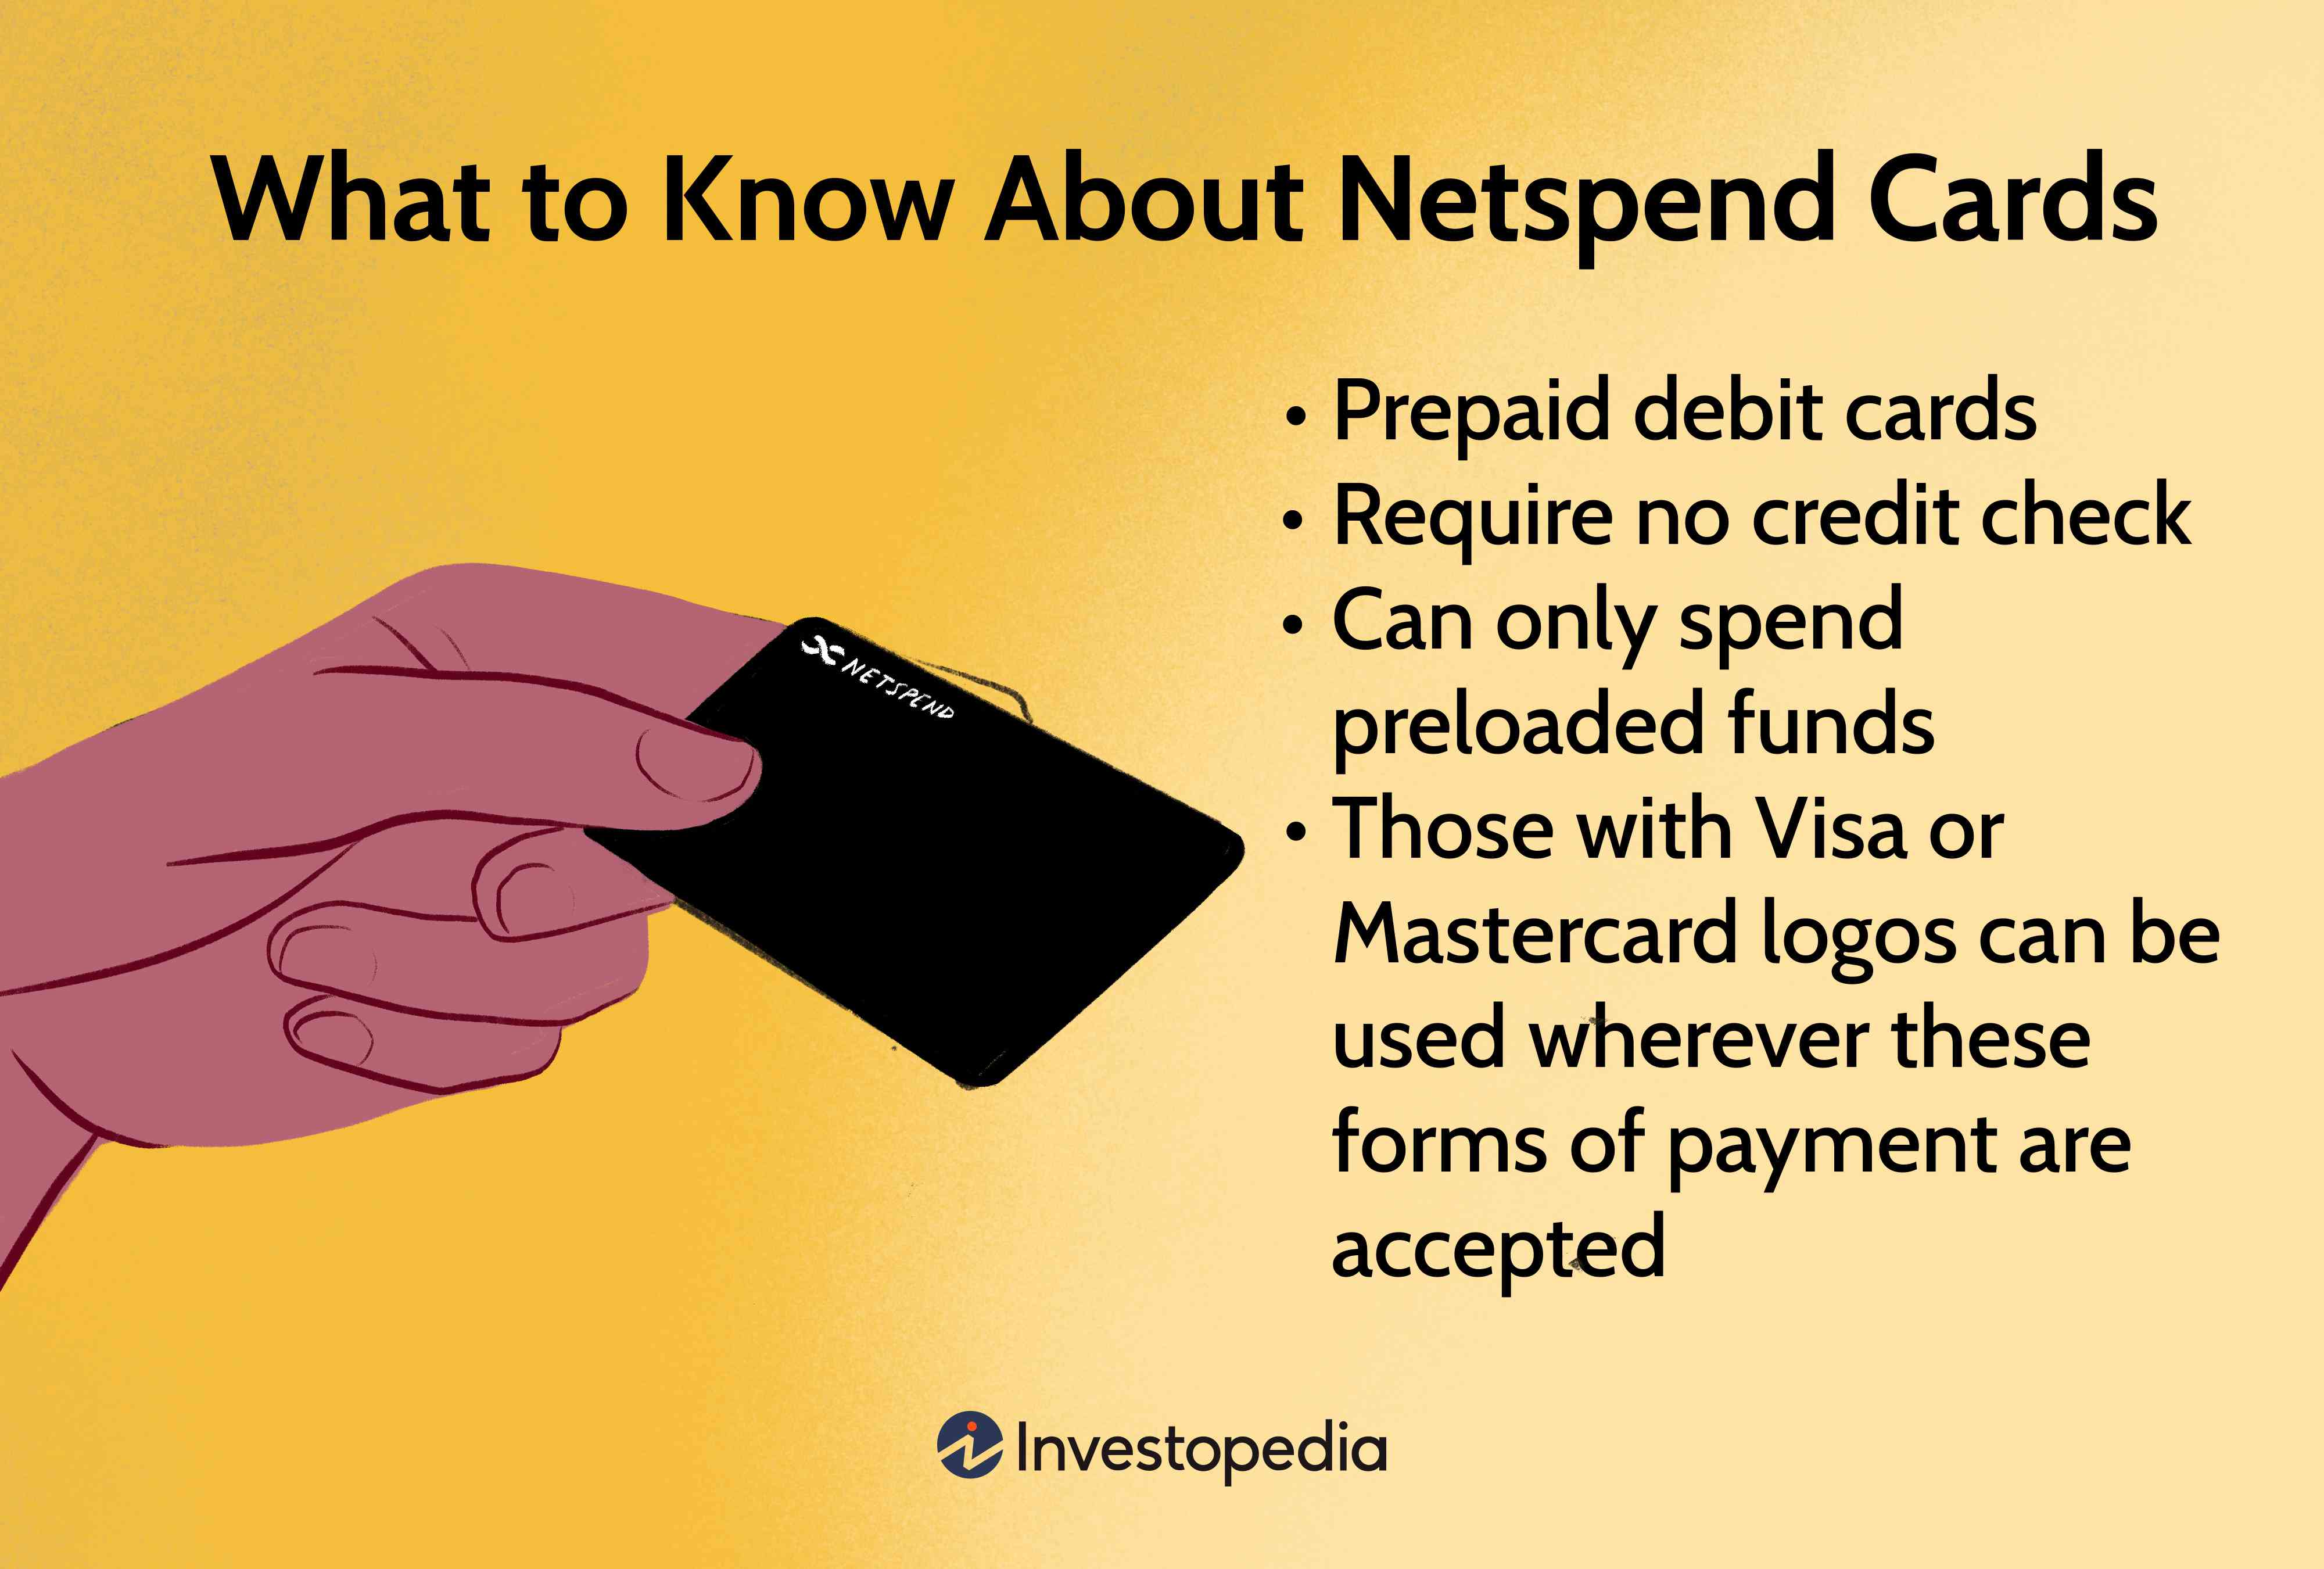 Custom illustration shows a hand holding a Netspend card with the title "What To Know About Netspend Cards," and copy that reads: Prepaid debit cards Require no credit check Can only spend preloaded funds Those with Visa or Mastercard logos can be used wherever these forms of payment are accepted.